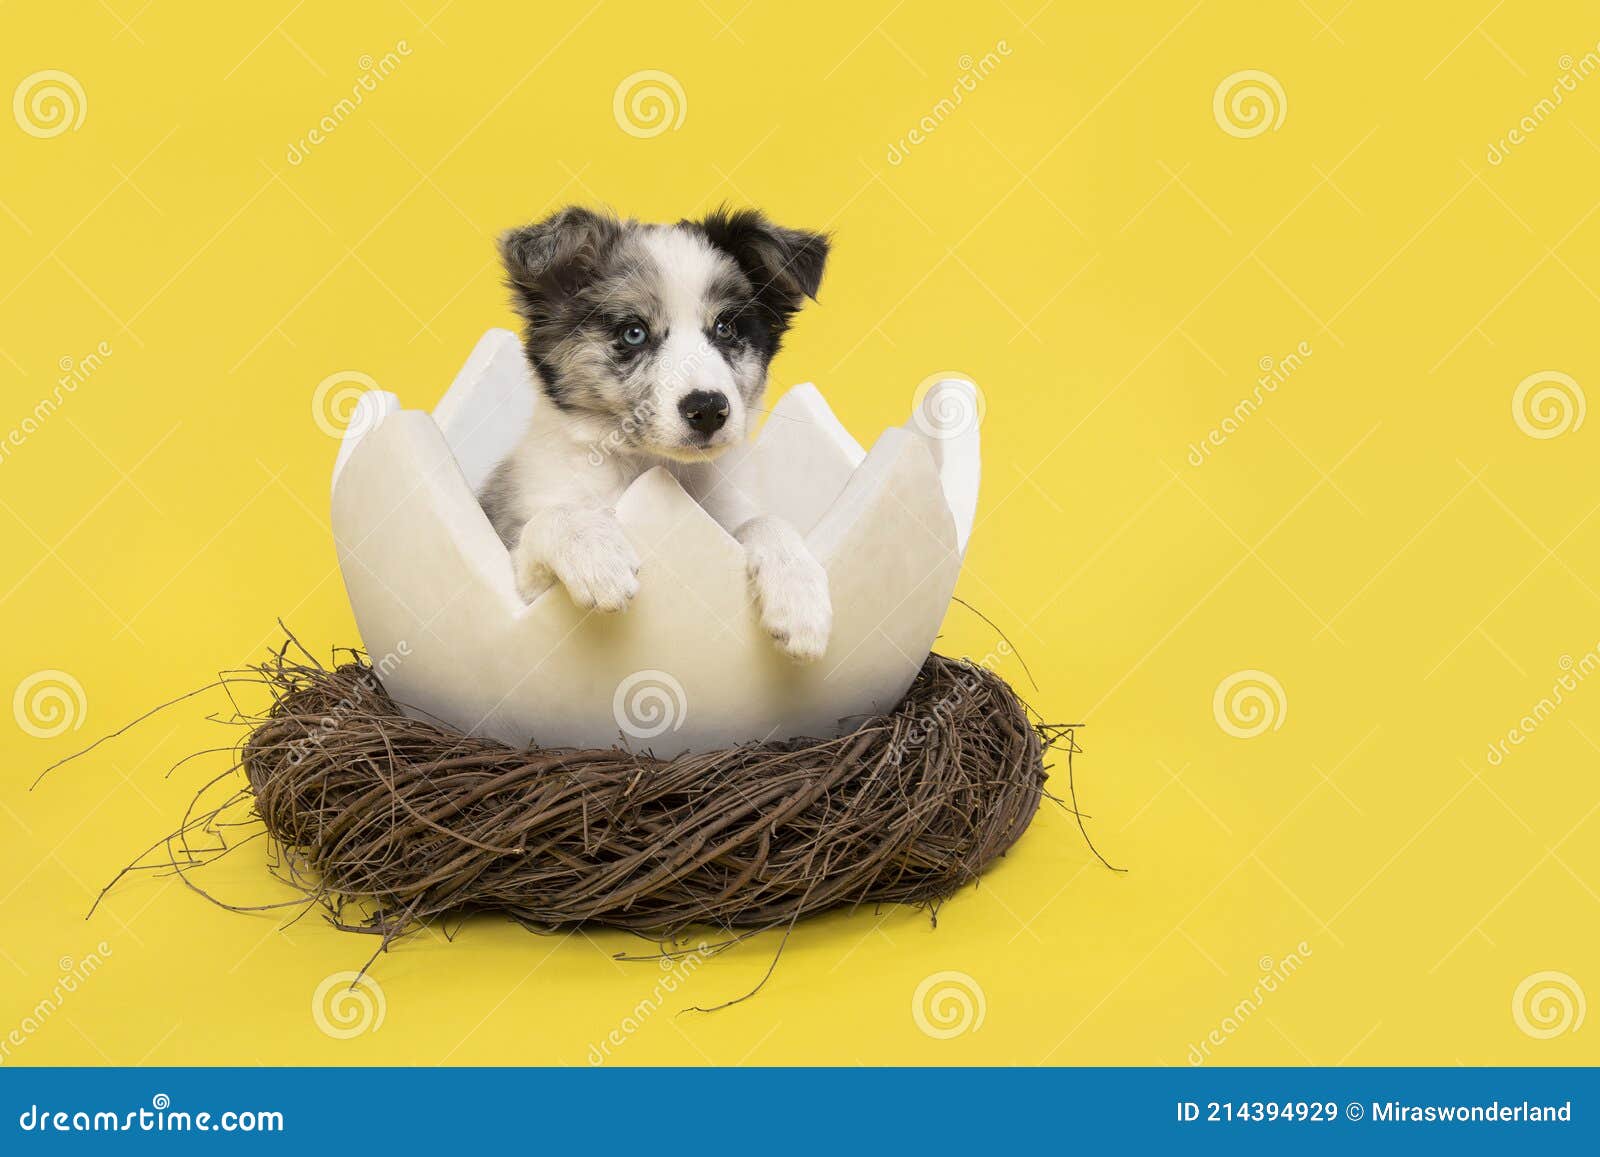 aankunnen In zoomen Shipley Border Collie Puppy in a Easter Egg Shell in a Animals Nest on a Yellow  Background in a Vertical Image with Space for Copy Stock Image - Image of  young, nest: 214394929